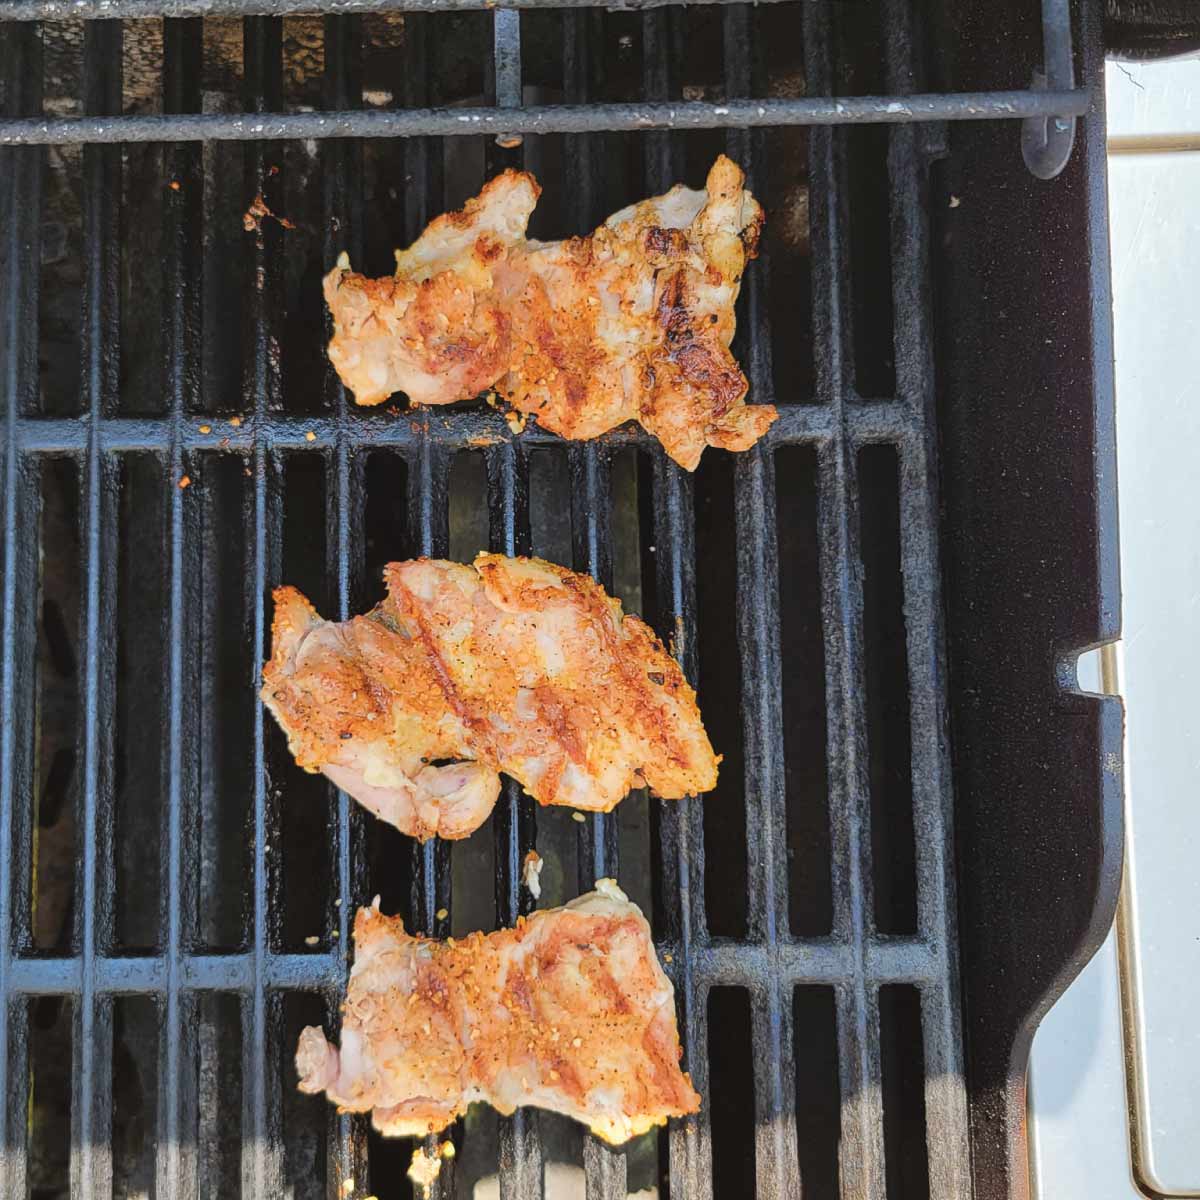 3 boneless chicken thighs on the grill after being flipped over with char marks on them.